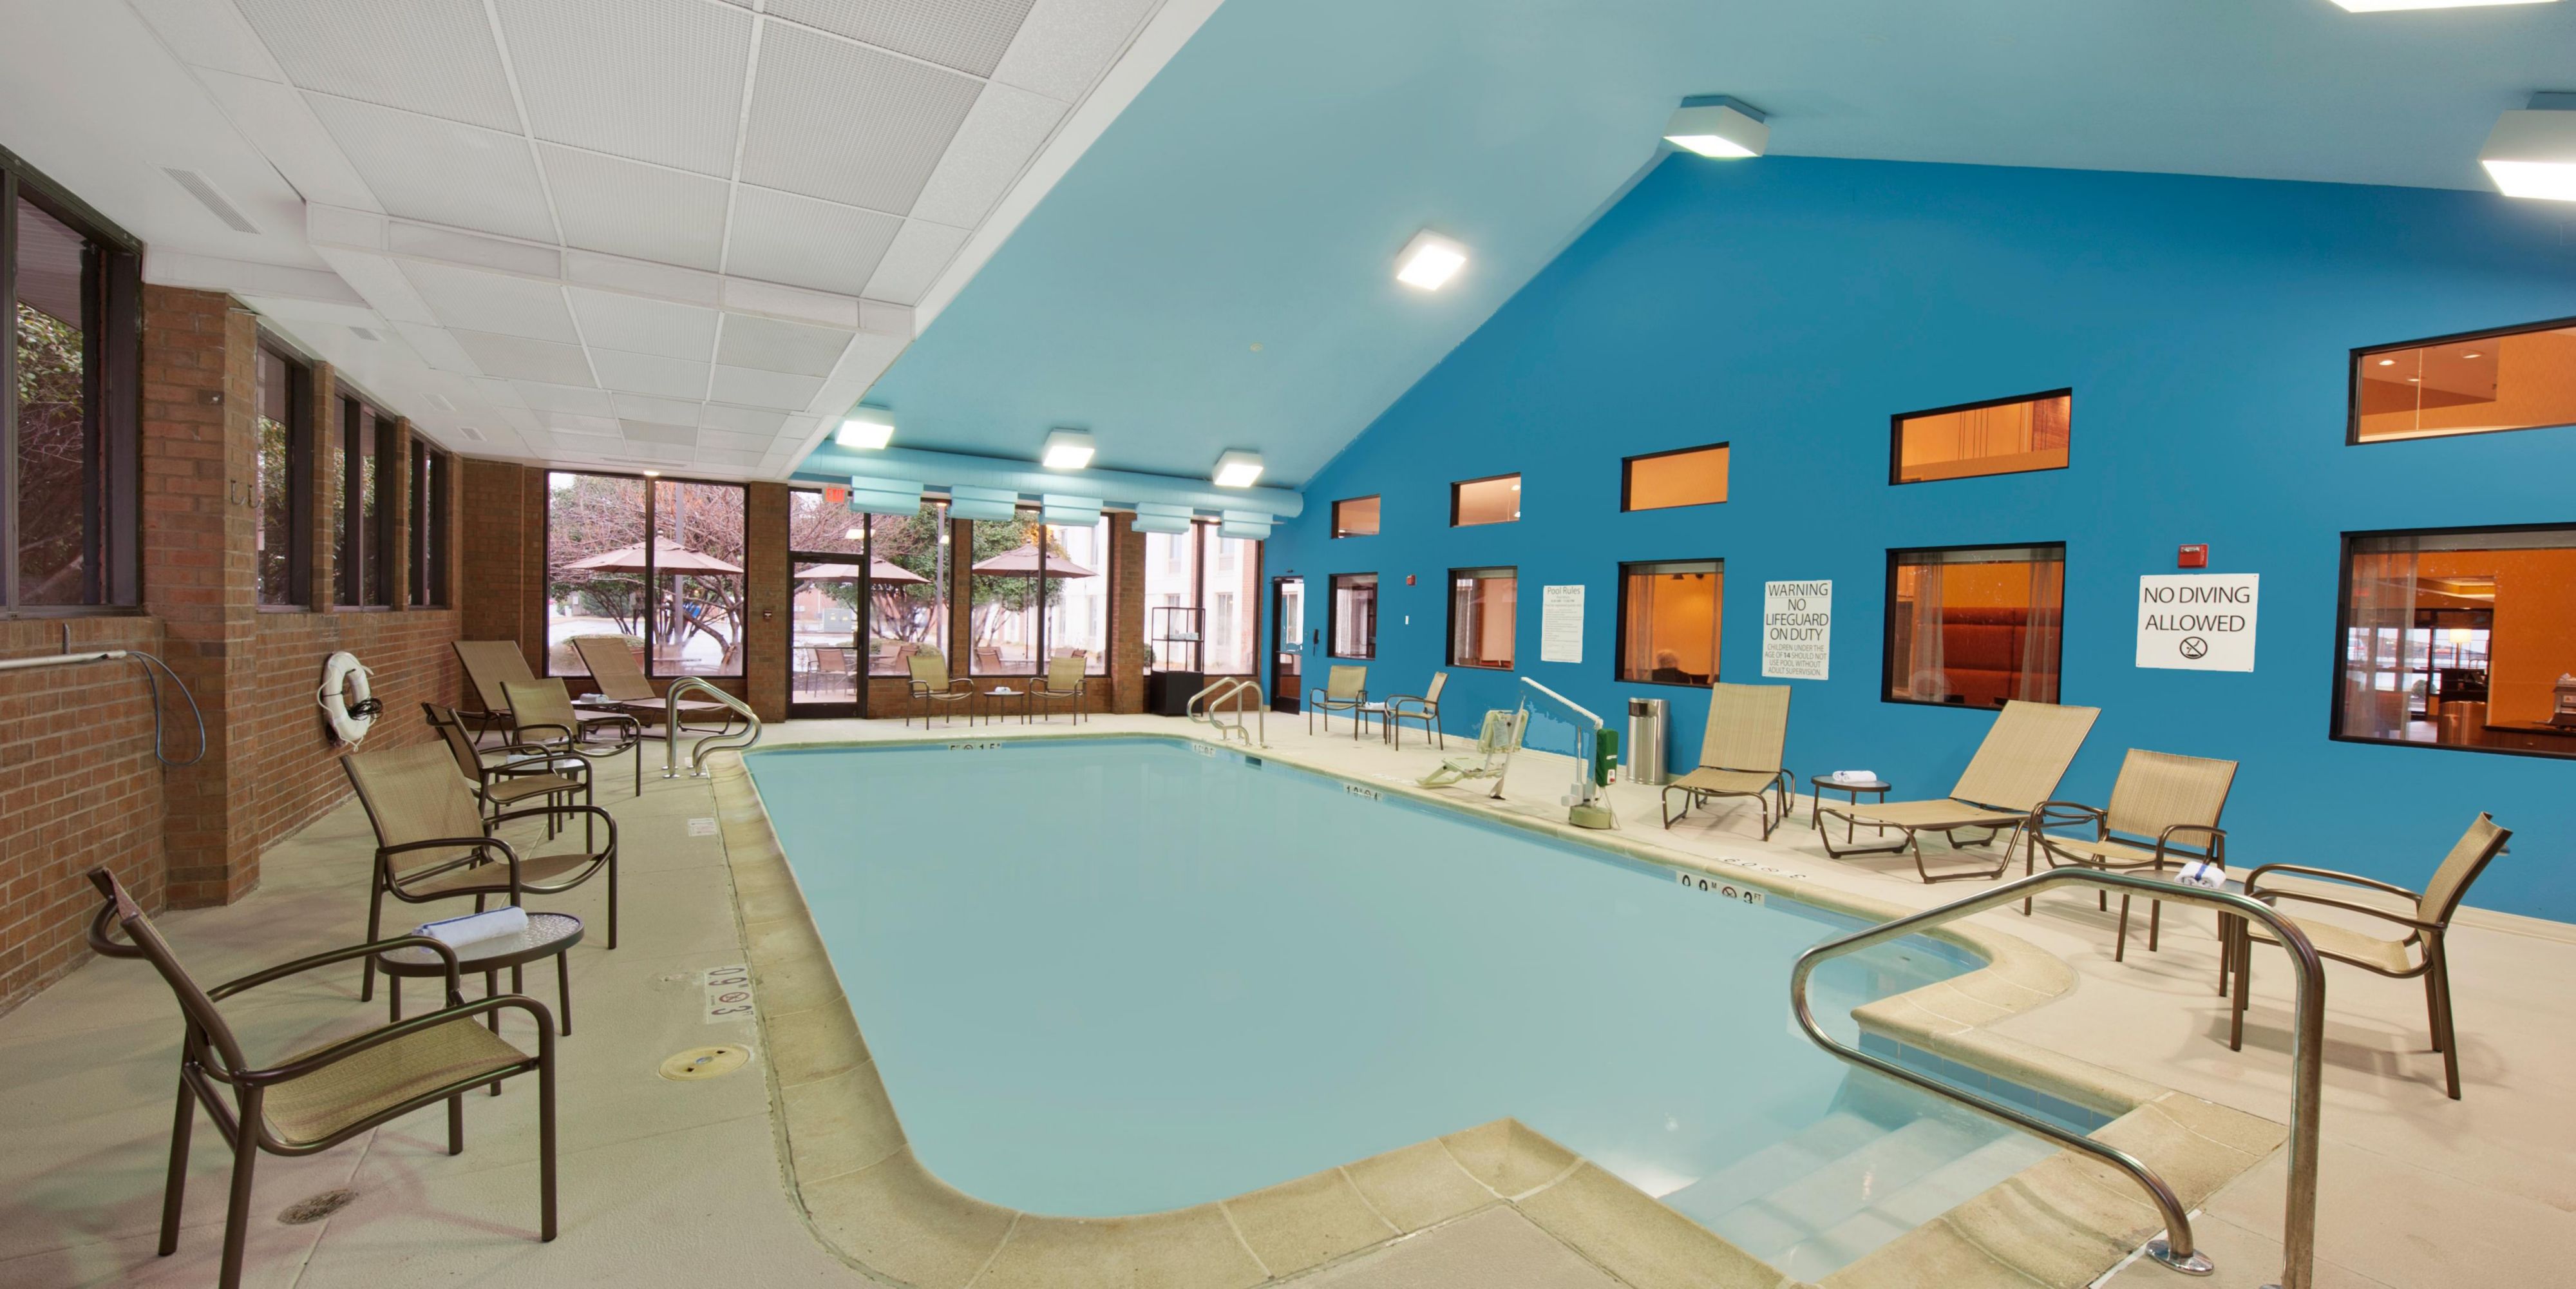 Rain or Shine, you can always take a dip at our indoor pool. Open from 9:30 am - 11:00 pm.